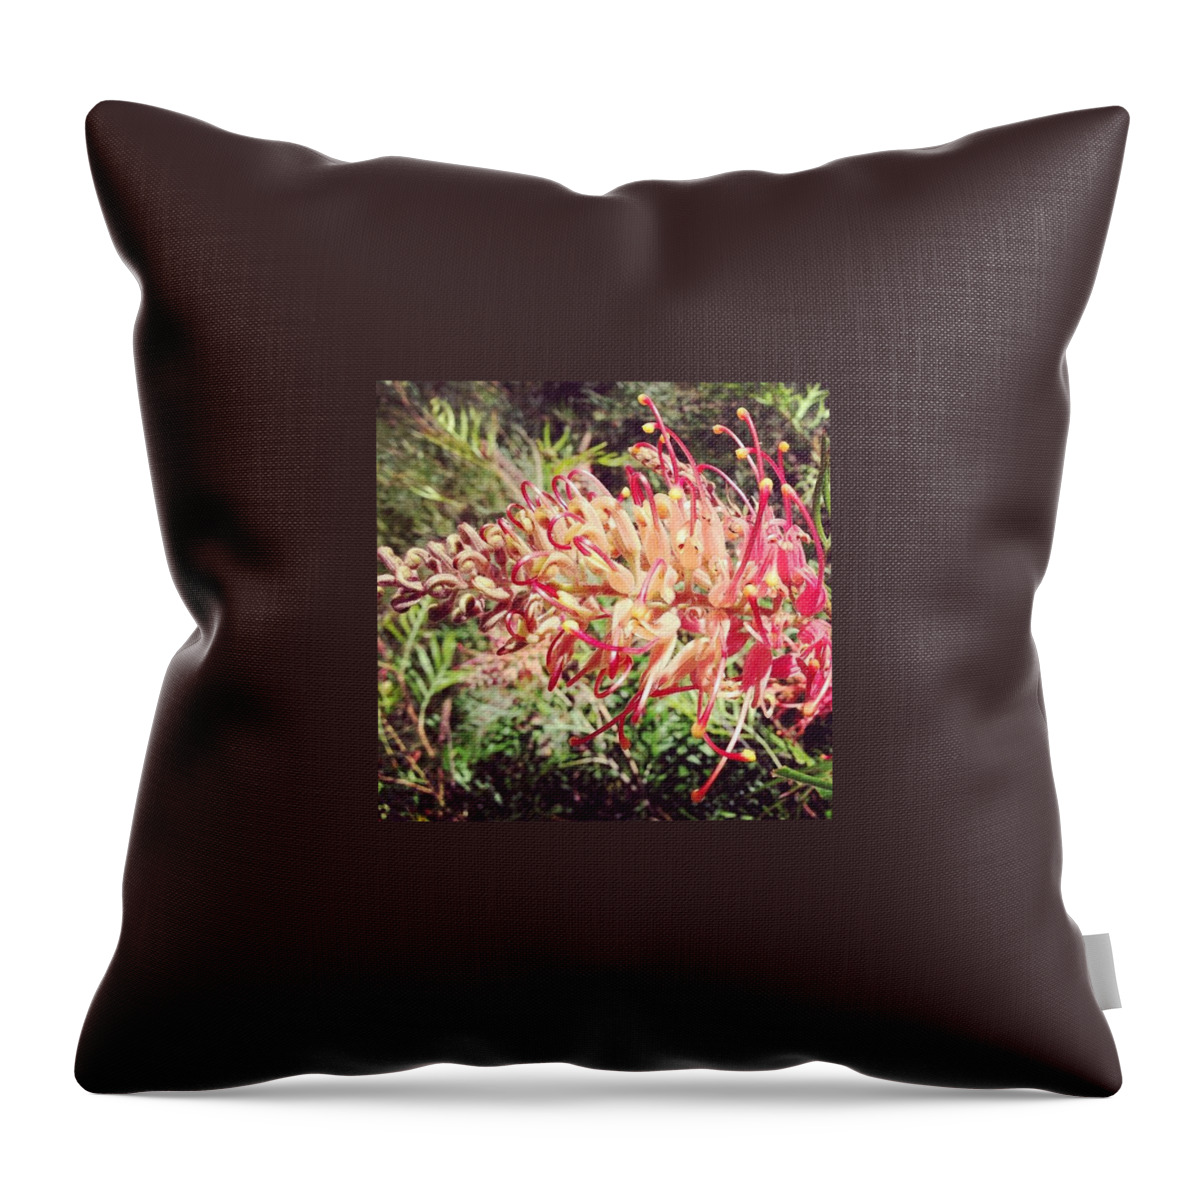 Grevillea Throw Pillow featuring the photograph Australian Grevillea Flower by Sinead Connell